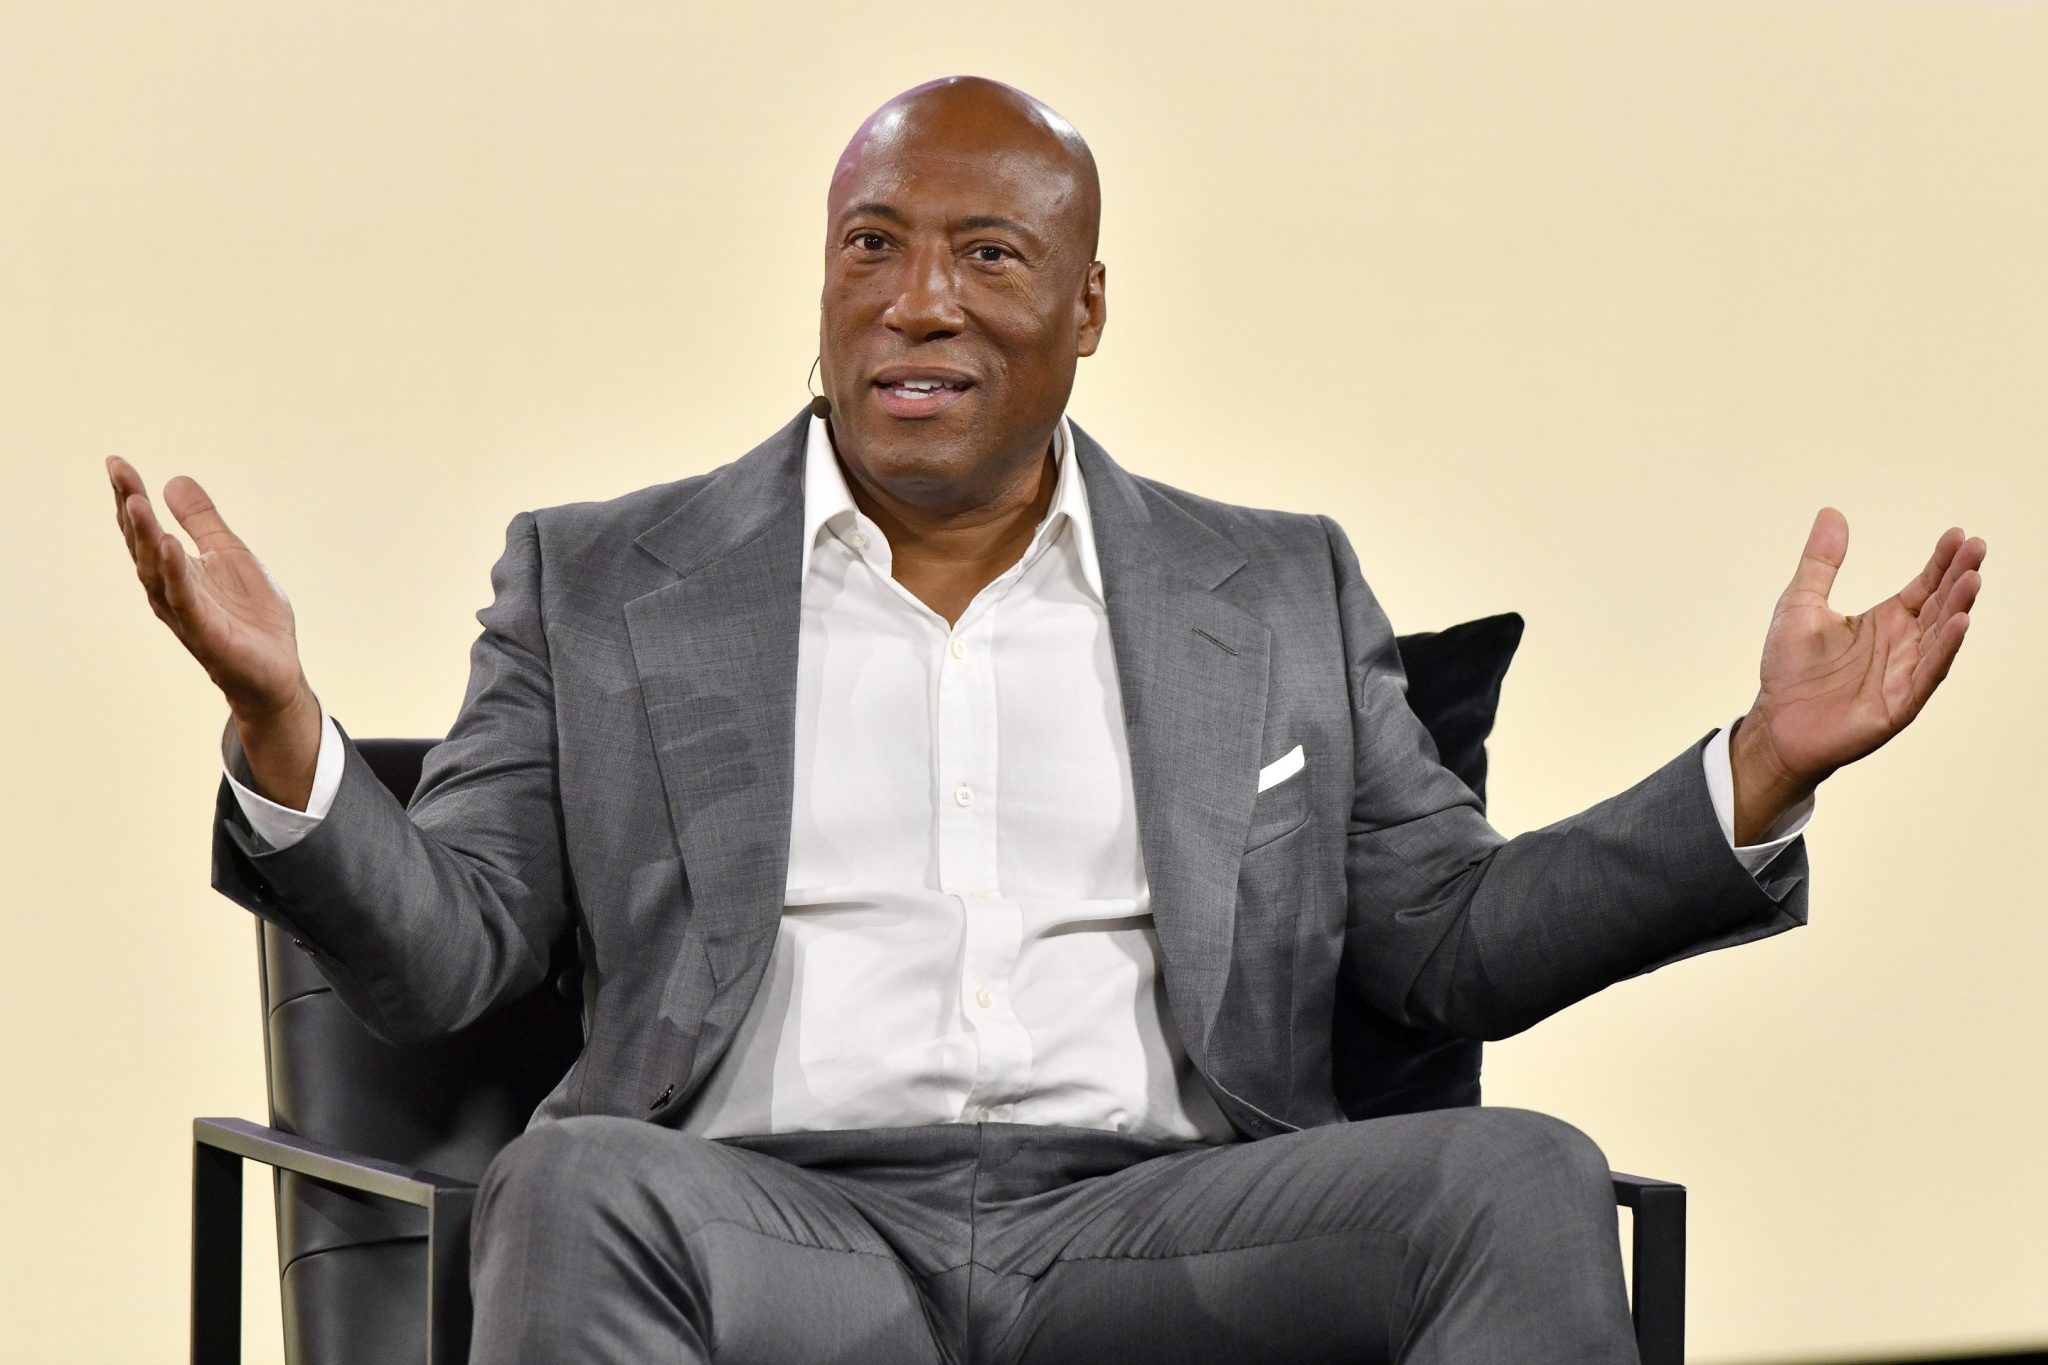 Byron Allen says he’s the best buyer for ABC, not Big Tech